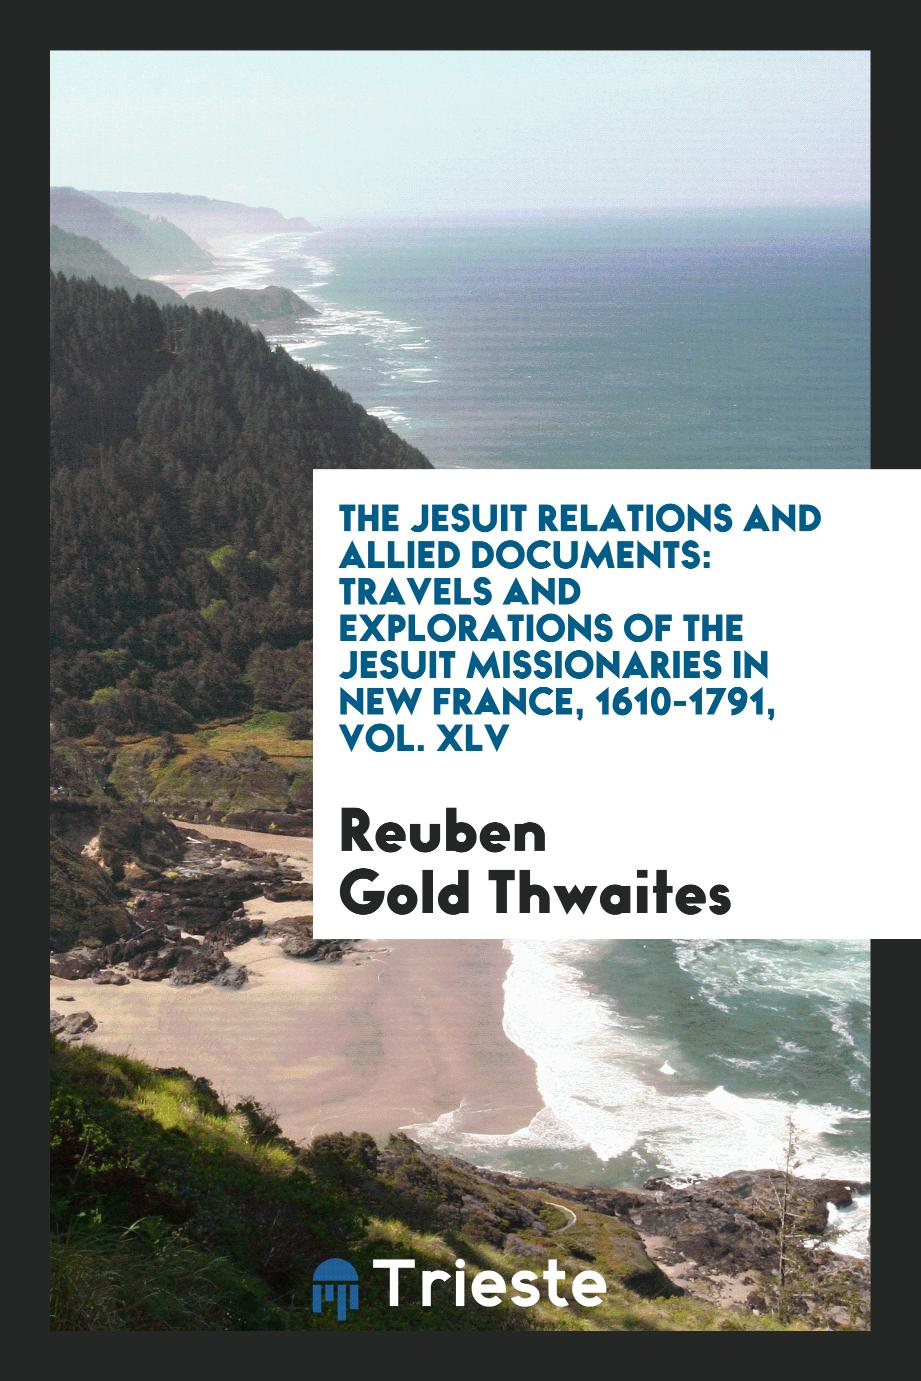 The Jesuit relations and allied documents: travels and explorations of the Jesuit missionaries in New France, 1610-1791, Vol. XLV